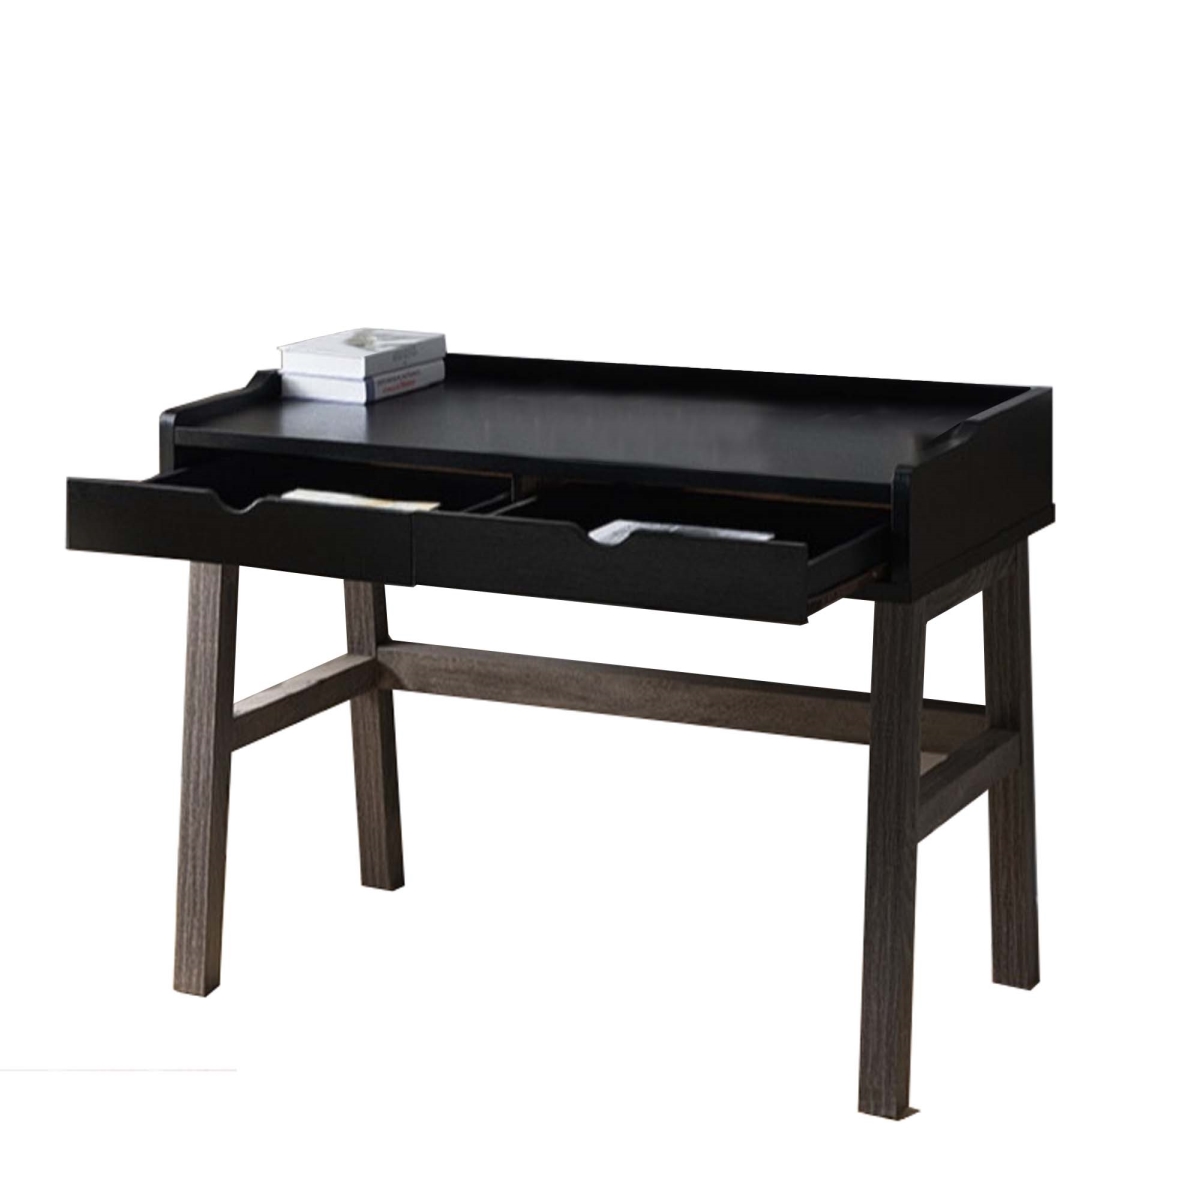 352133 Dual Toned Wooden Desk With Two Sleek Drawers & Slightly Splayed Legs, Gray & Black